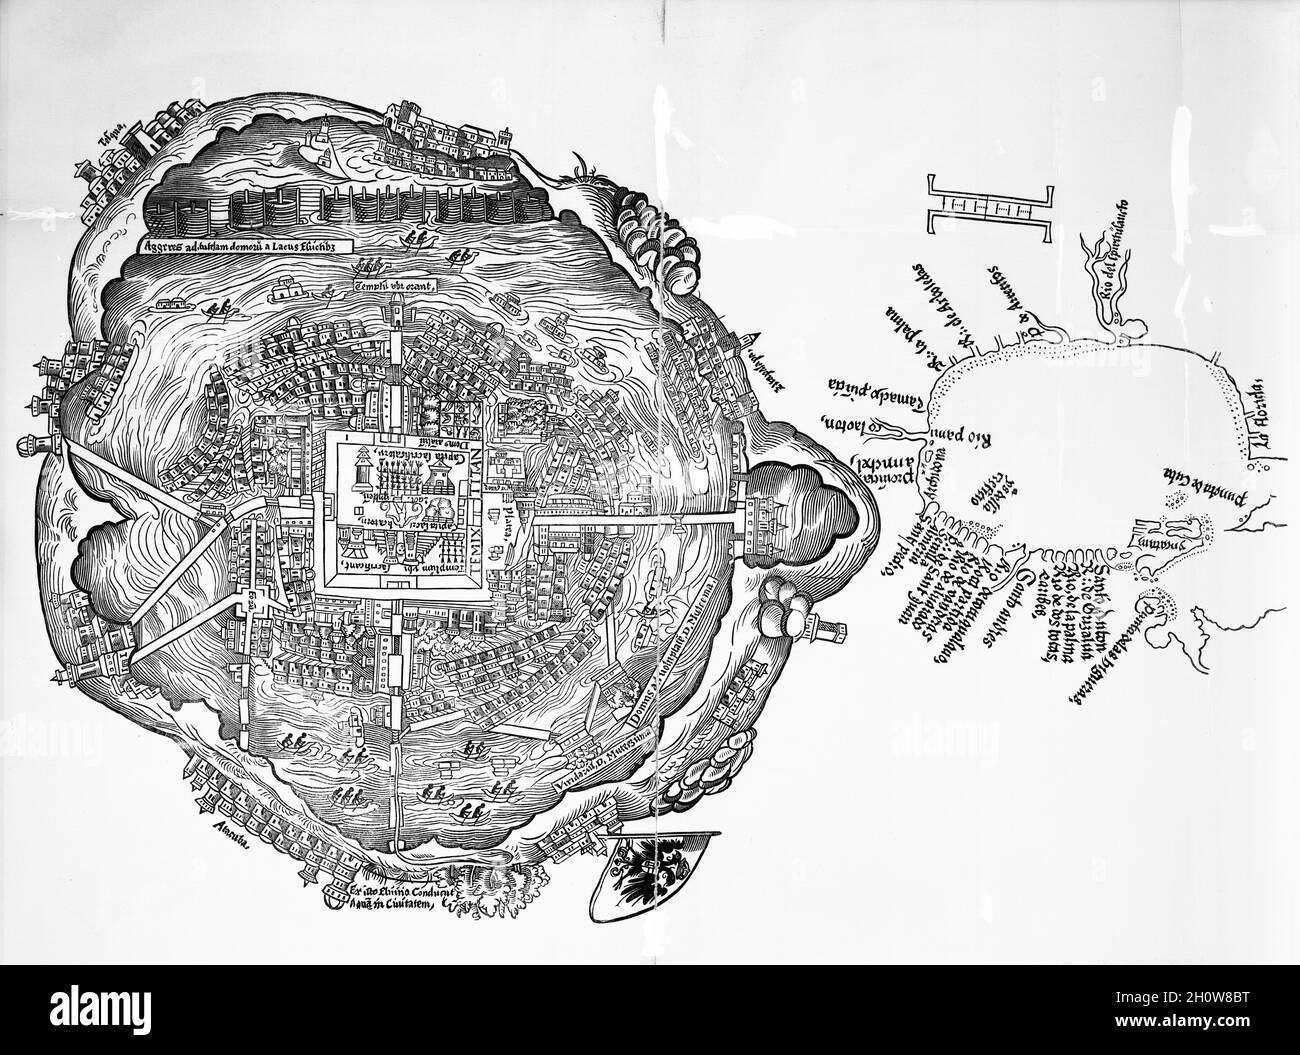 Old map of the ancient Aztec capital city of Tenochtitlan, Mexico. Now the historic center of Mexico City. Stock Photo